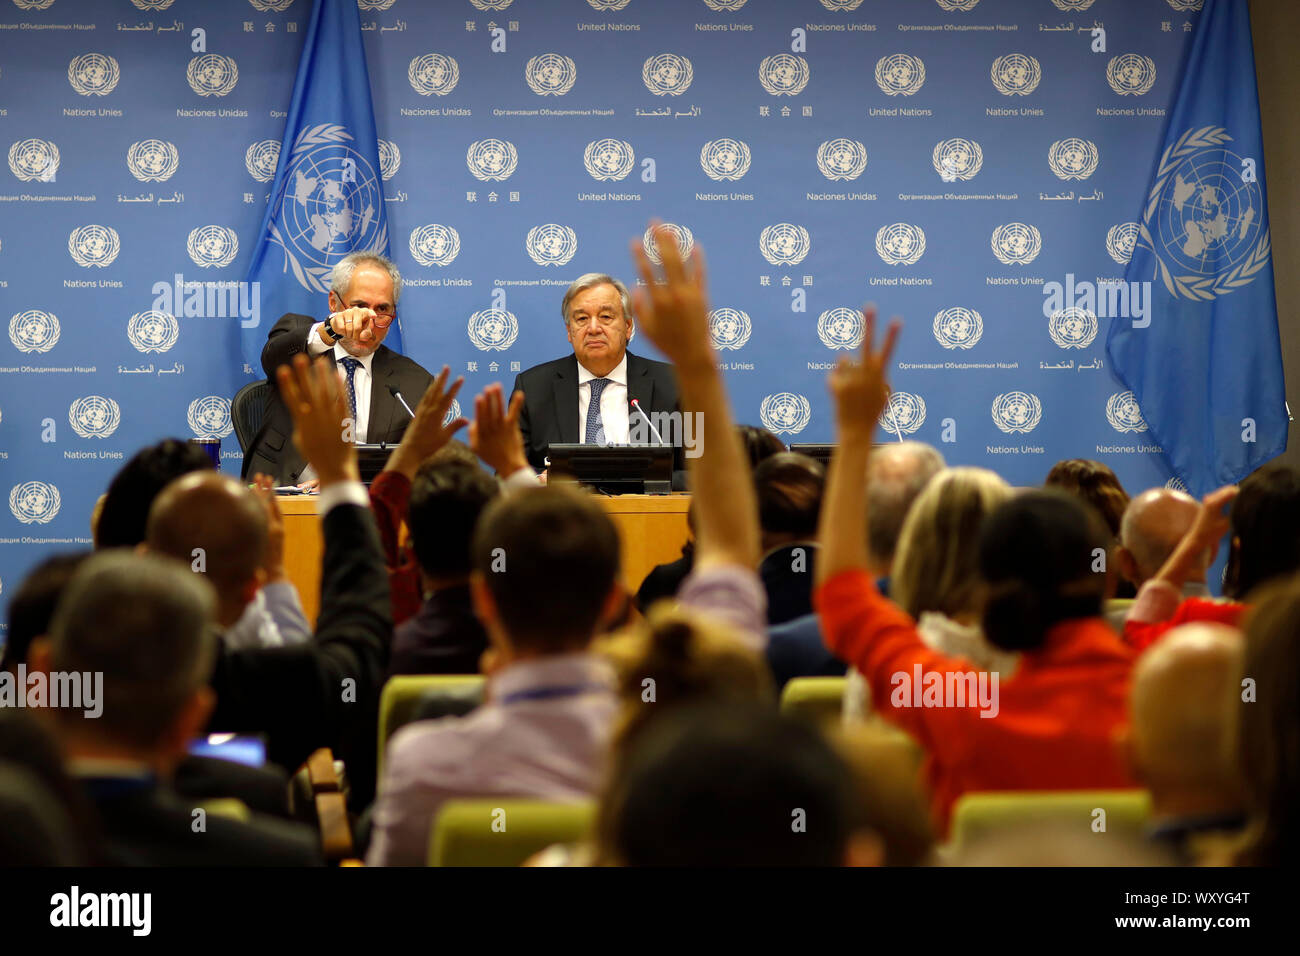 United Nations, UN headquarters in New York. 18th Sep, 2019. UN Secretary-General Antonio Guterres (R, rear) attends a press conference at the UN headquarters in New York, Sept. 18, 2019. The 74th session of the United Nations General Assembly (UNGA 74) will spotlight climate change in the coming days when leaders gather at the UN headquarters in New York to discuss issues of common concern, Antonio Guterres said Wednesday. Credit: Li Muzi/Xinhua/Alamy Live News Stock Photo